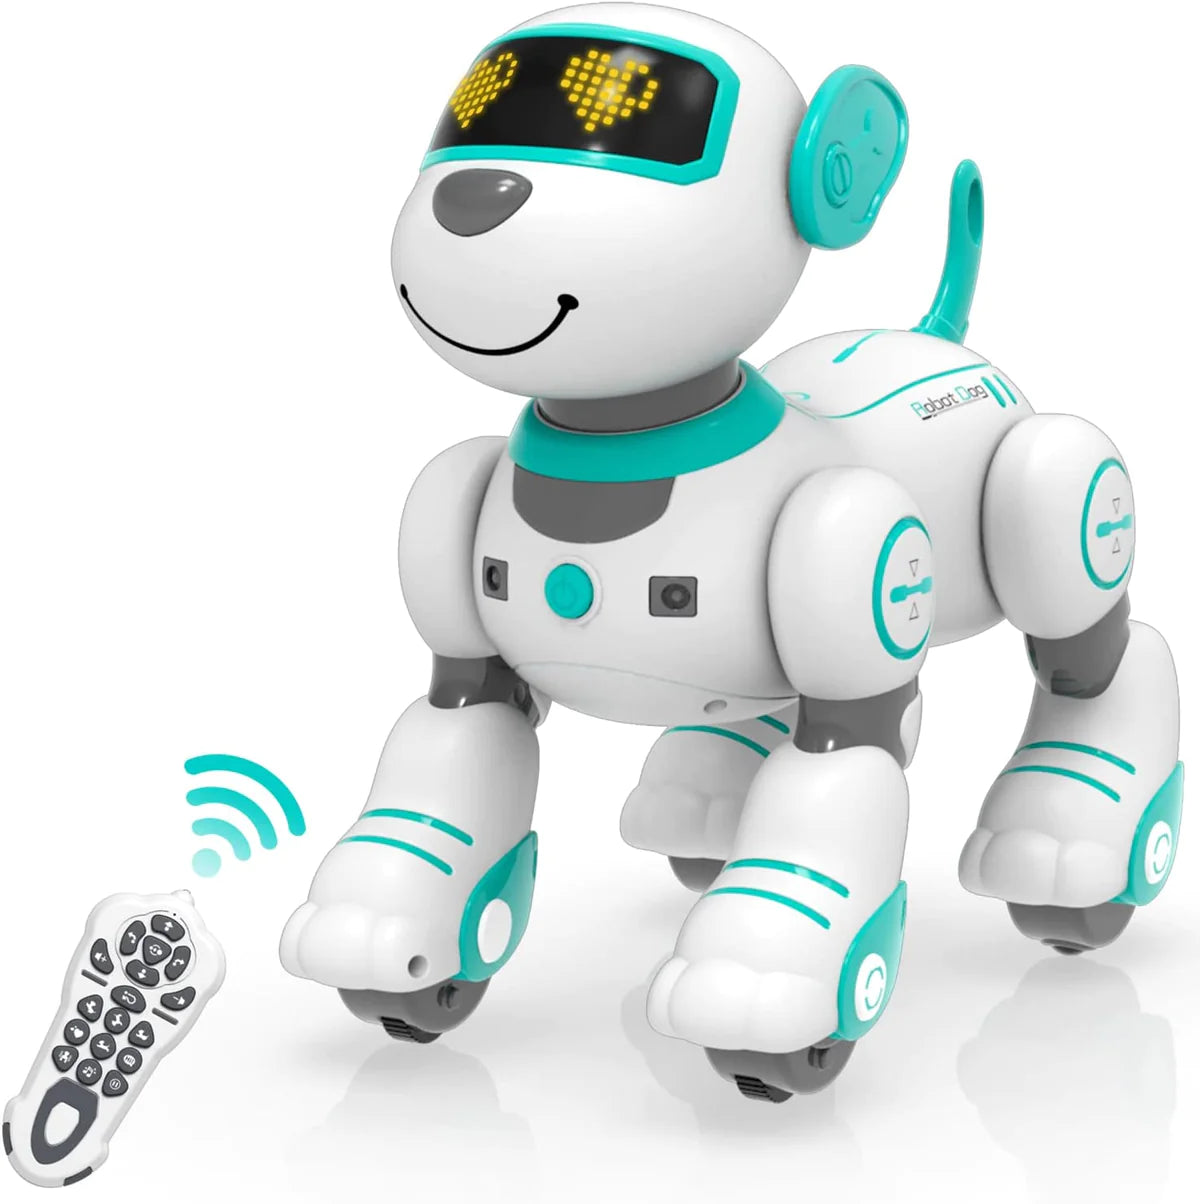 The STEMTRON Programmable Interactive Smart Dancing Remote Control Robot Dog Toy for Kids: A Review